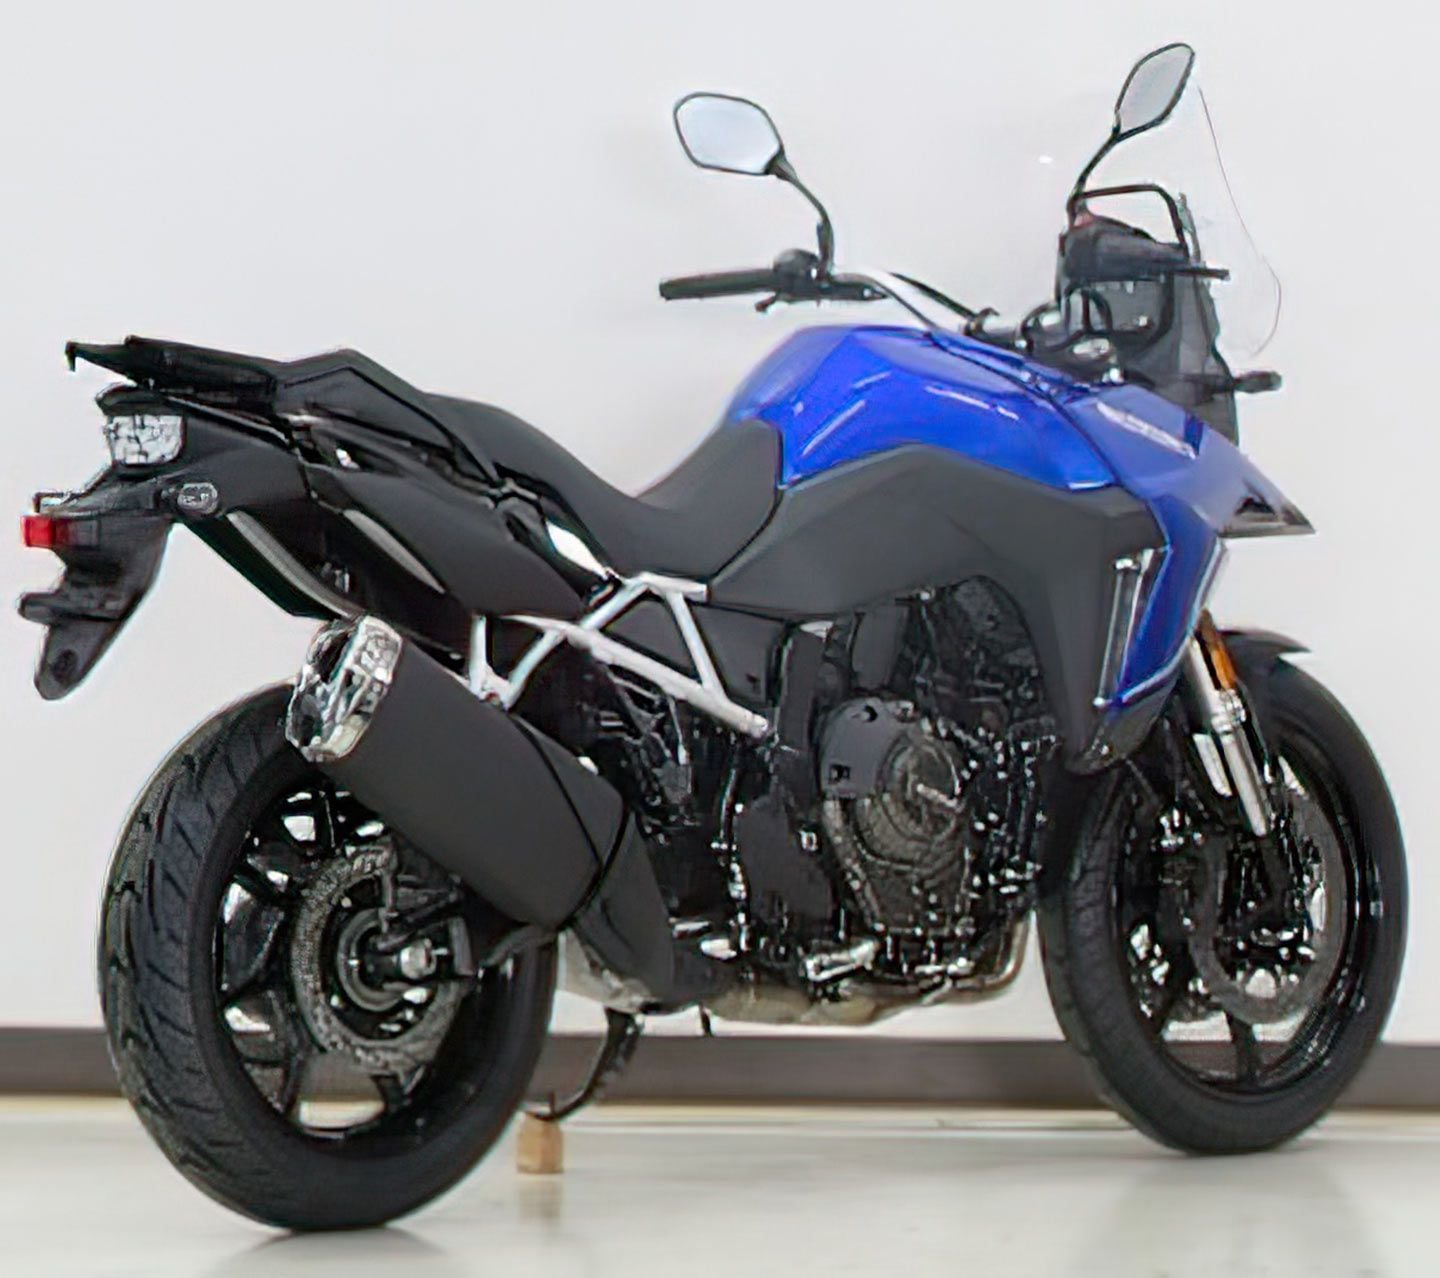 The new V-Strom 800 will have street-oriented tires, suspension, and brakes.